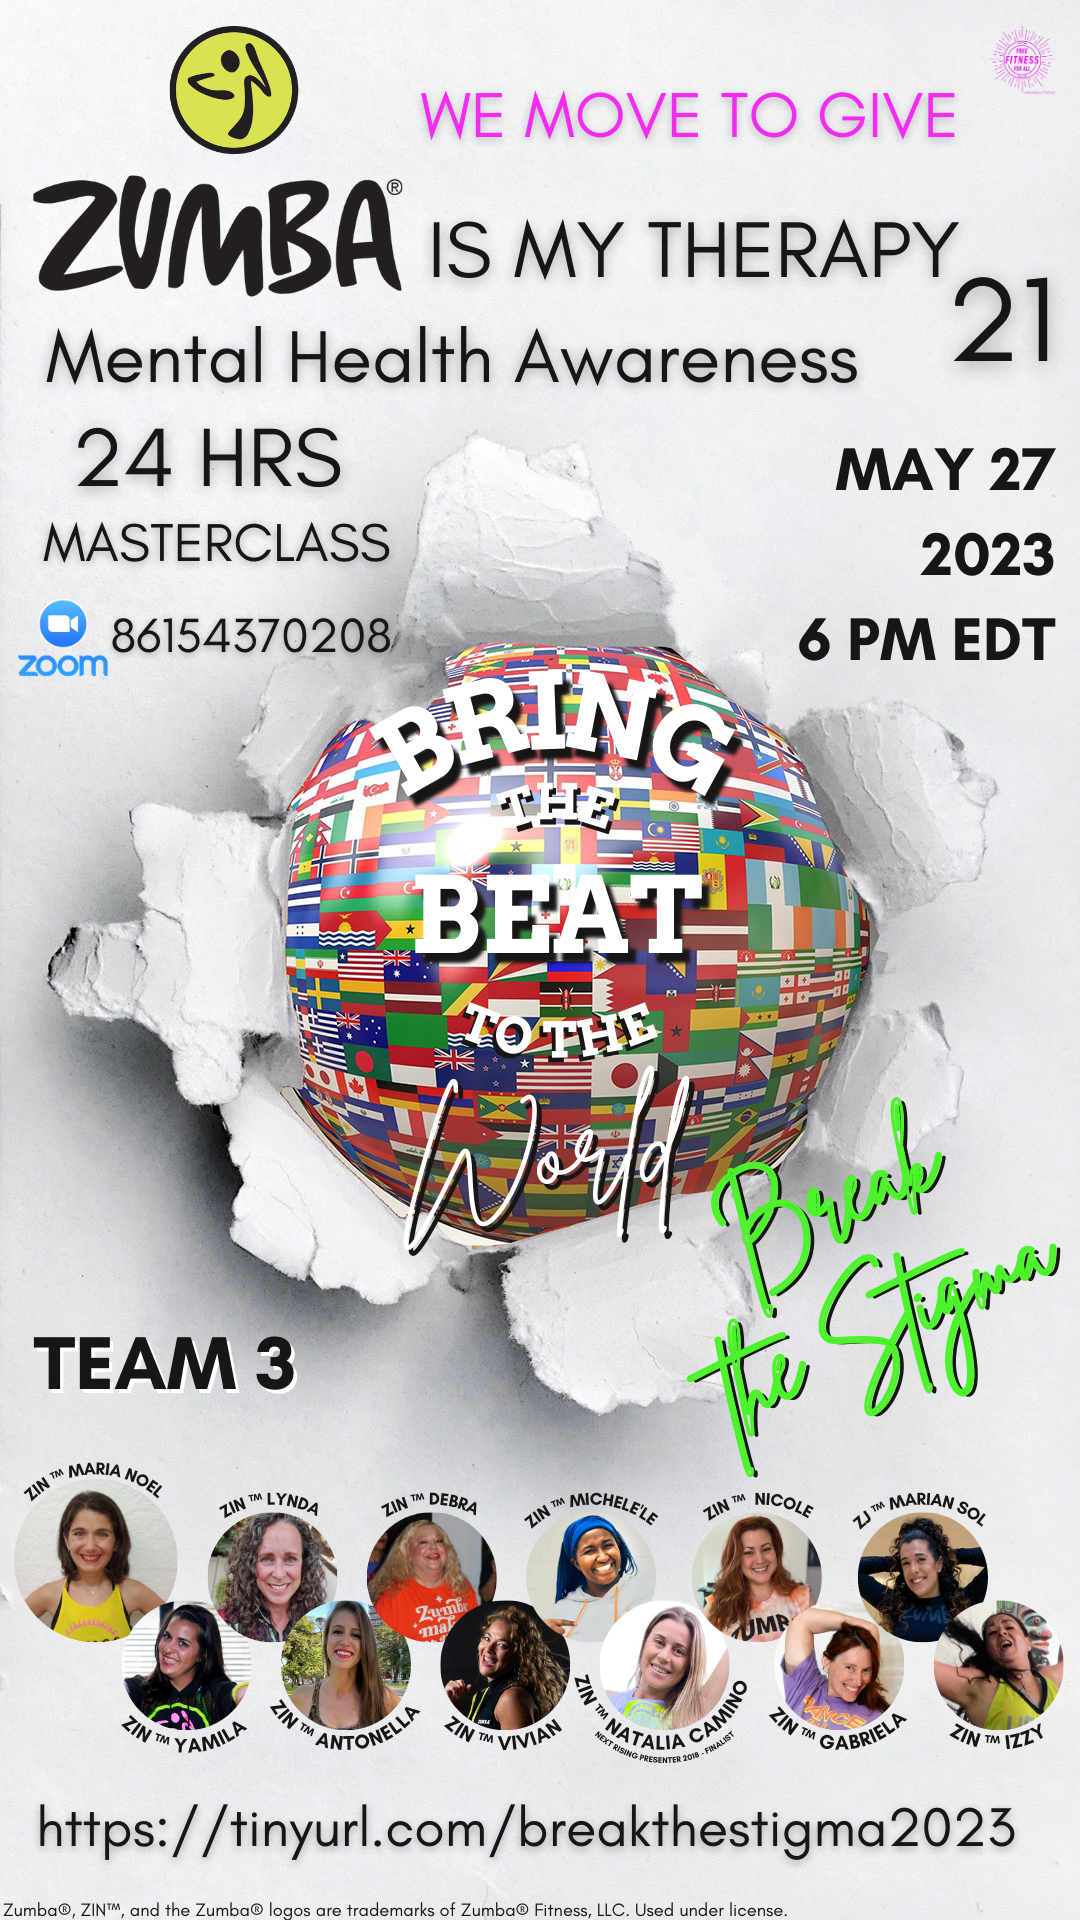 Team 3- May 27th 6 PM EDT